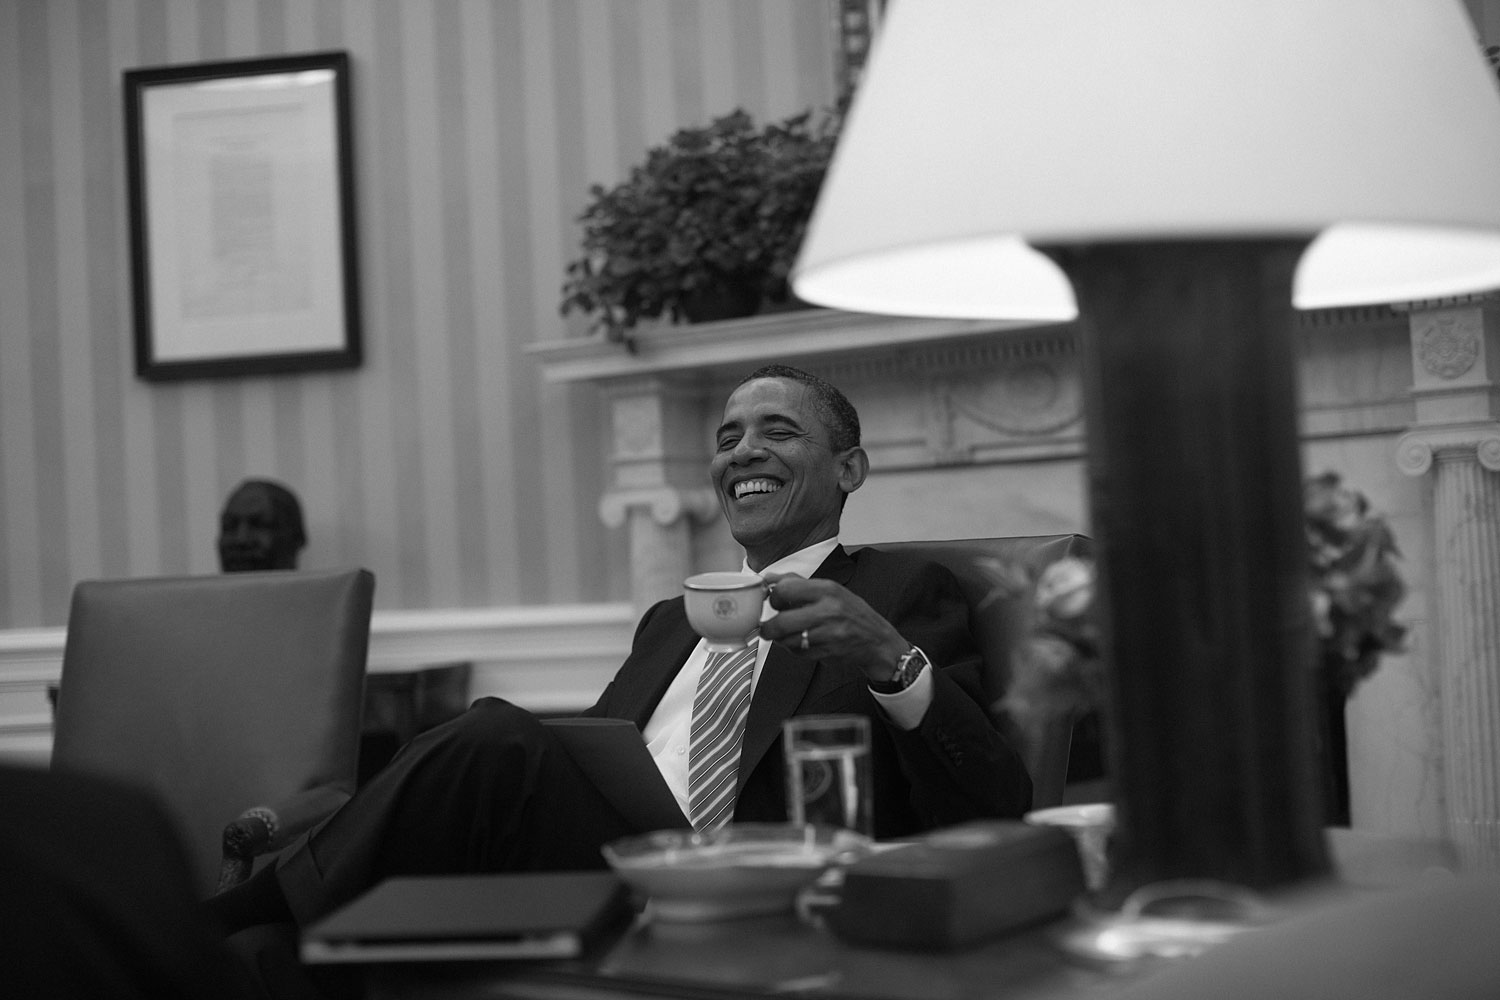 January 17, 2012. President Obama sits in the Oval Office to discuss his State of the Union Address with speechwriters at the end of the day.